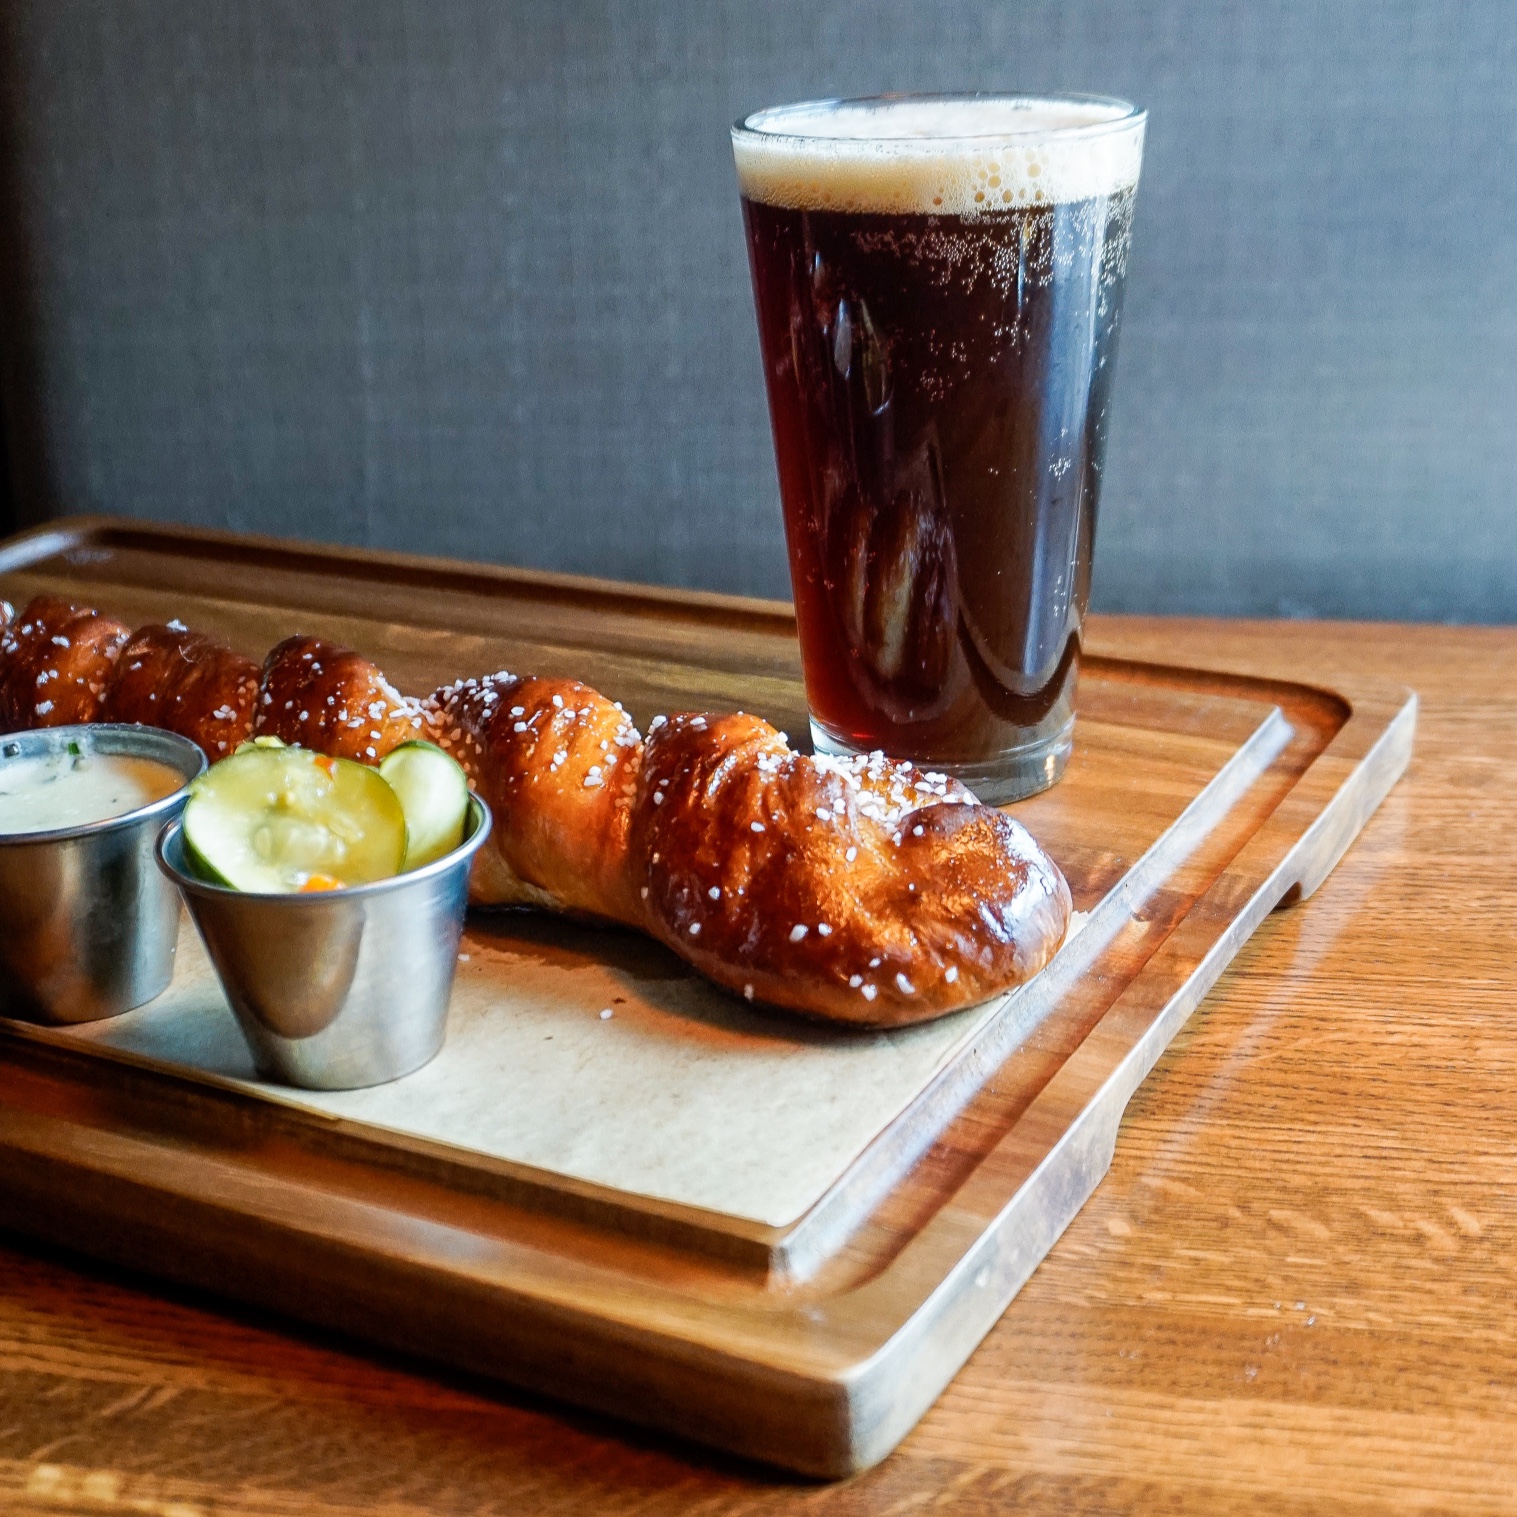 A pretzel and a glass of beer on a wooden tray.